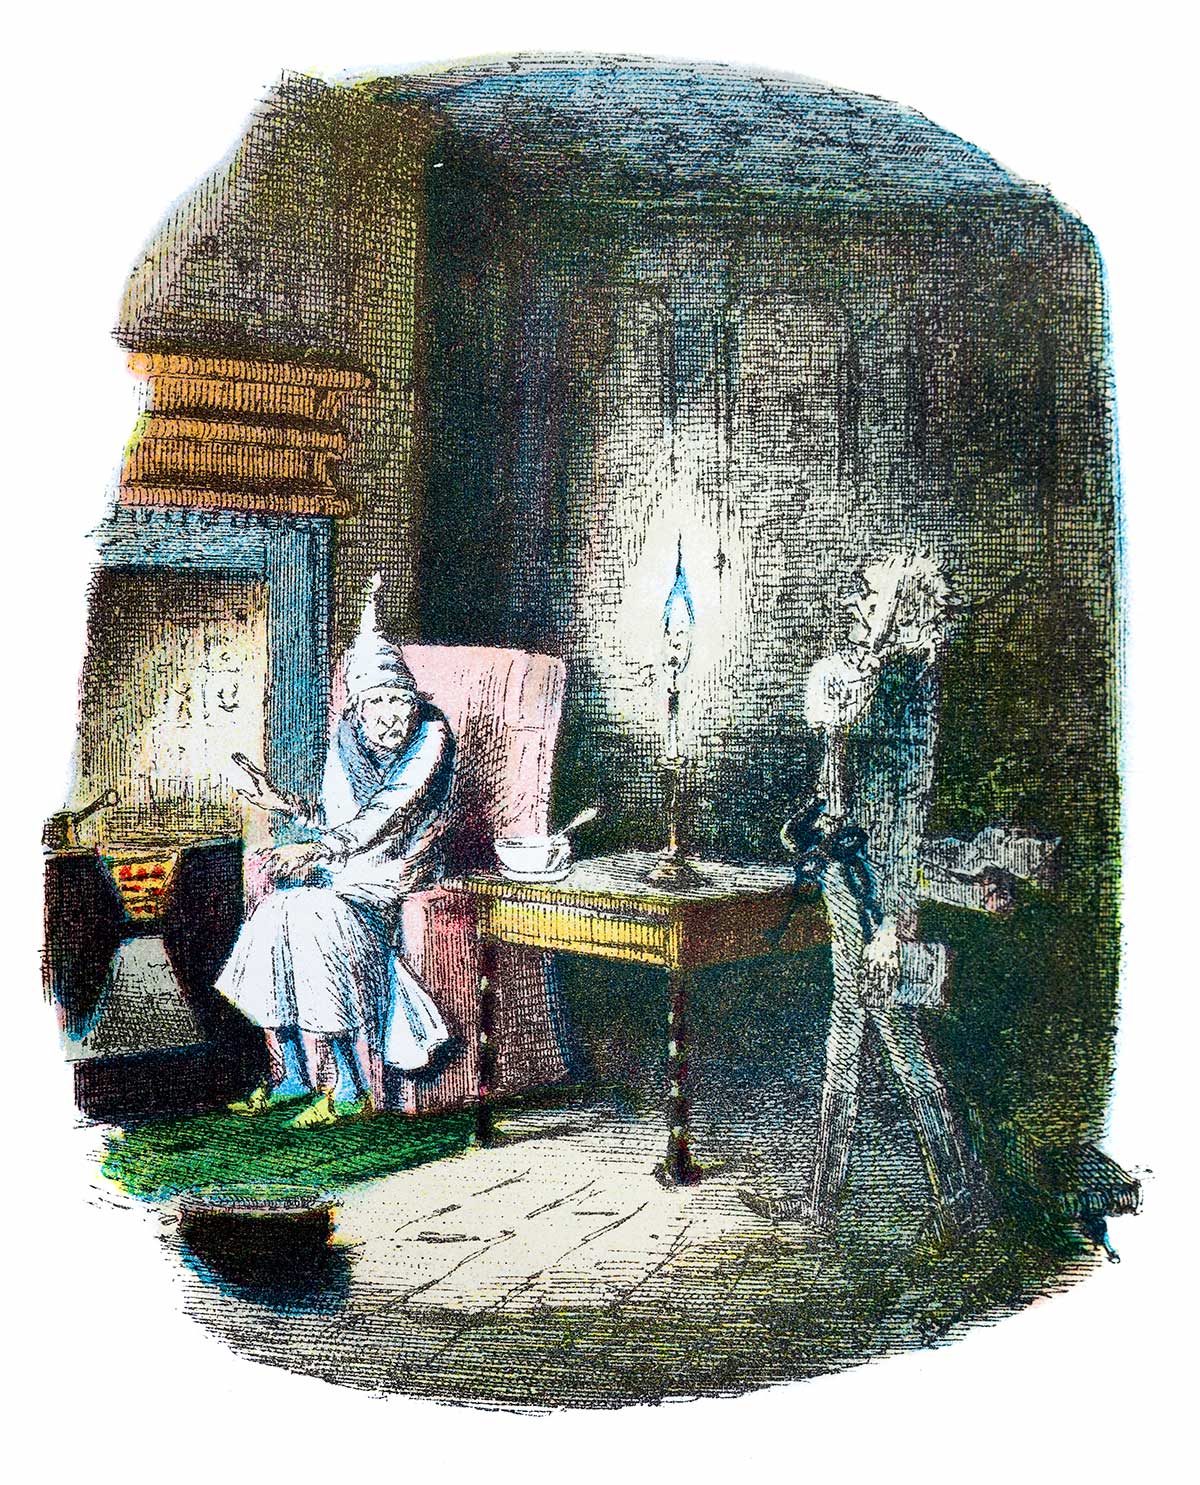 Illustration from A Christmas Carol by Charles Dickens showing Marley visiting Scrooge